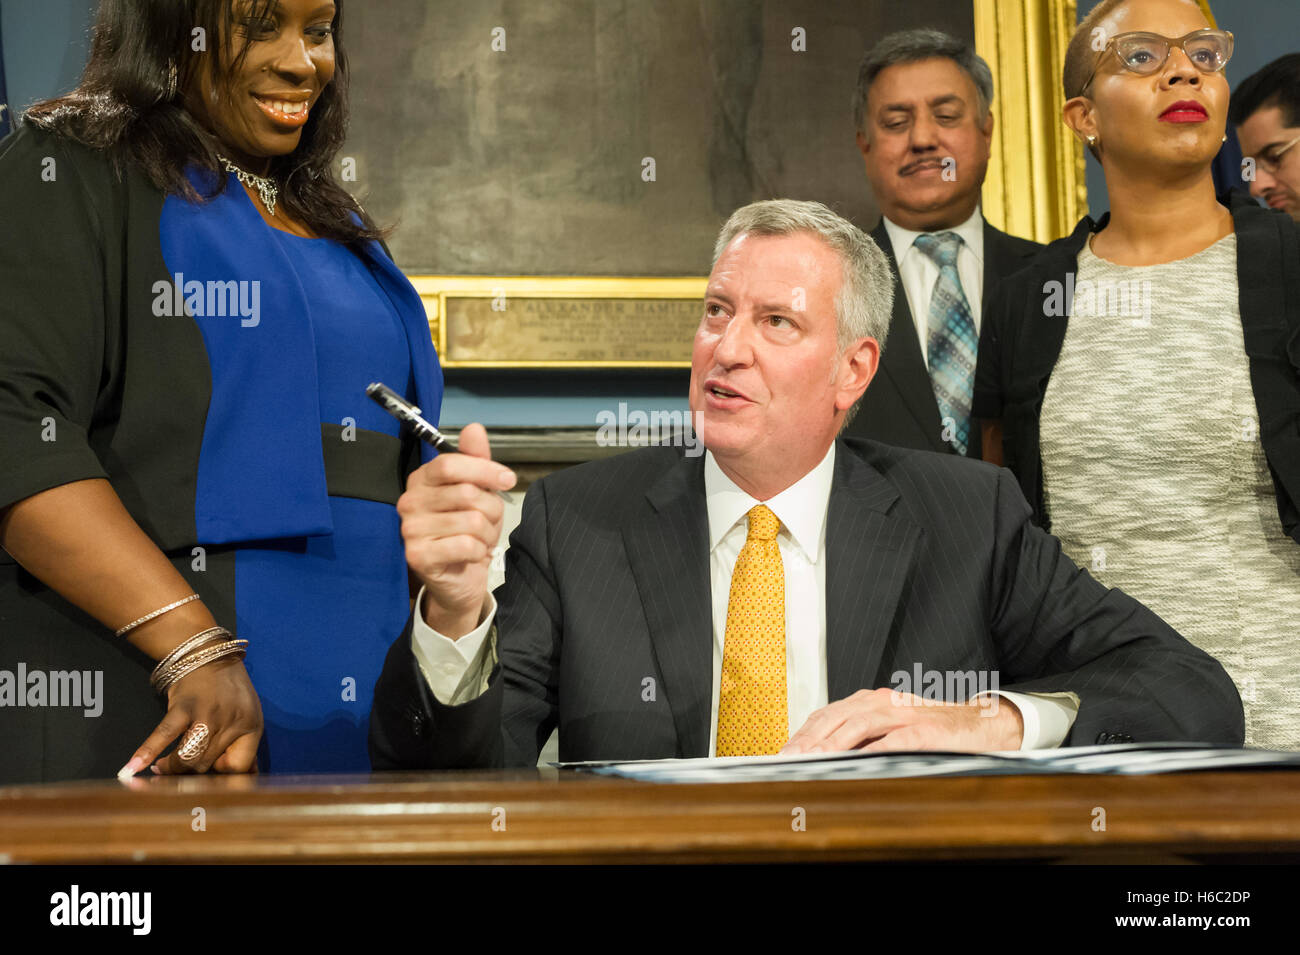 New York Mayor Bill de Blasio, center, at a bill signing related to increasing reporting and transparency around programs and services for inmates in the Blue Room in New York City Hall, on Tuesday, October 18, 2016 in New York. (© Frances M. Roberts) Stock Photo